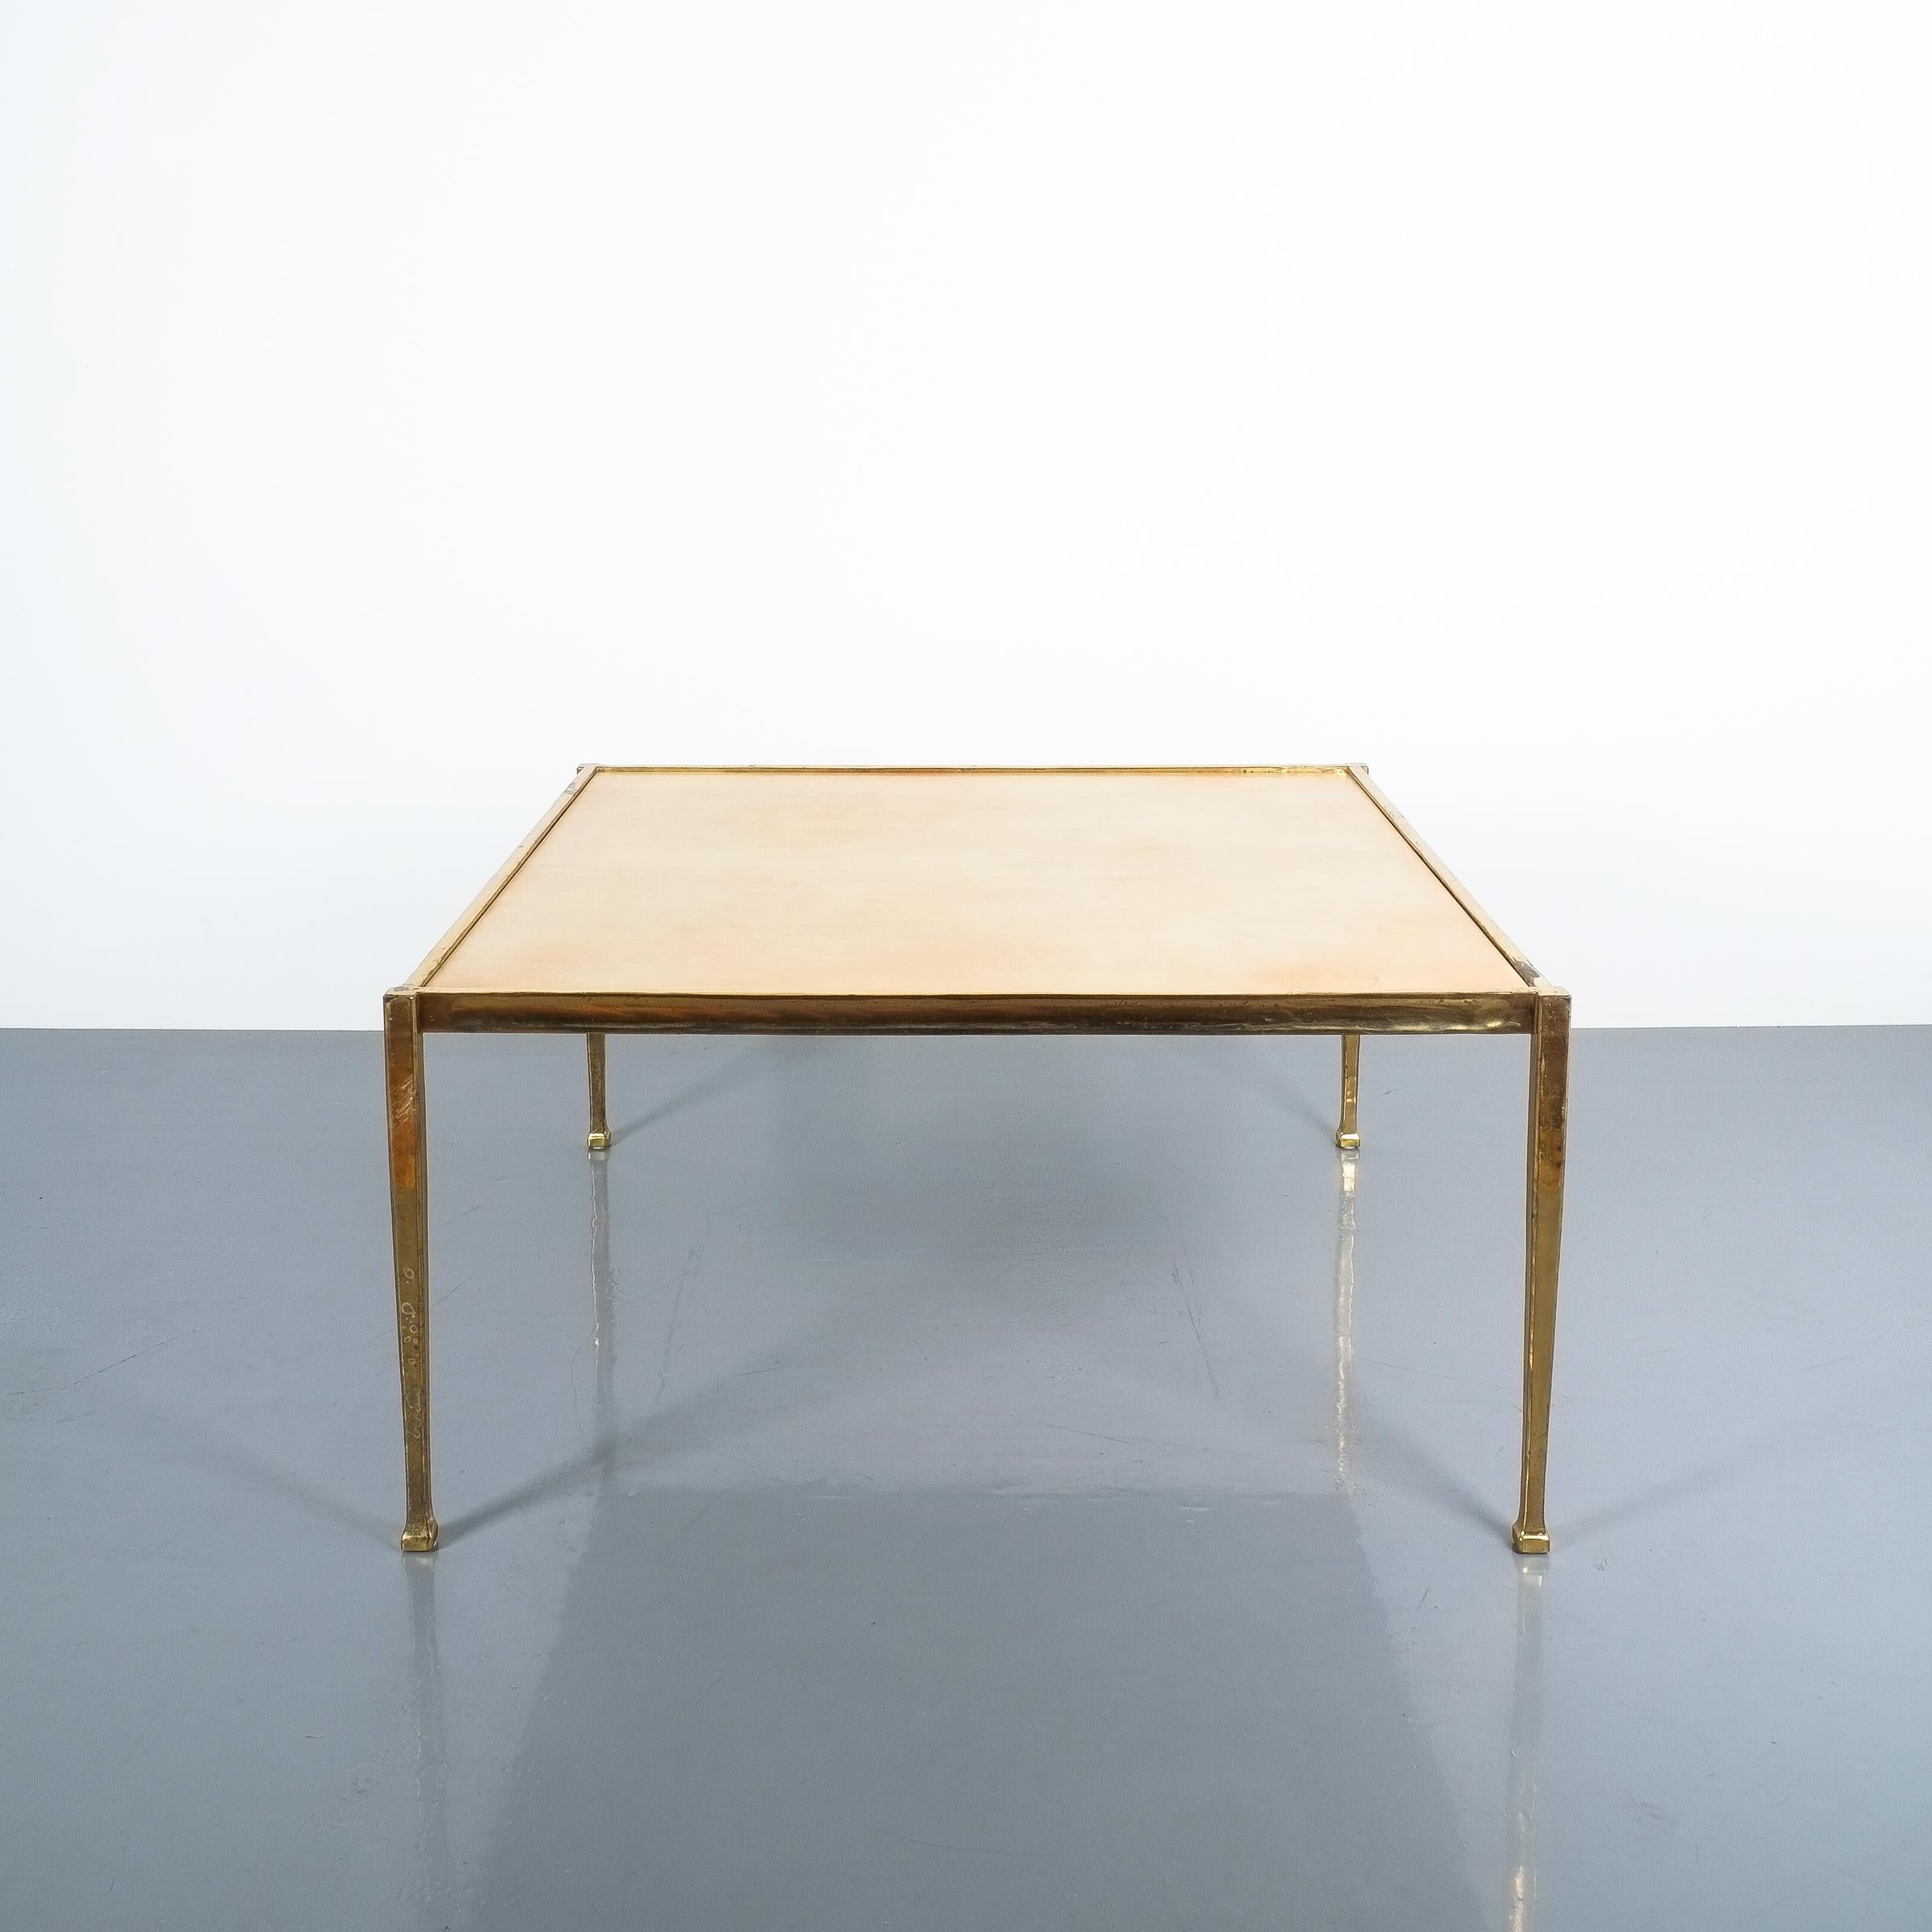 Square large coffee table from solid brass and parchment, France, circa 1965.

Dimensions are 35 x 35 x 17